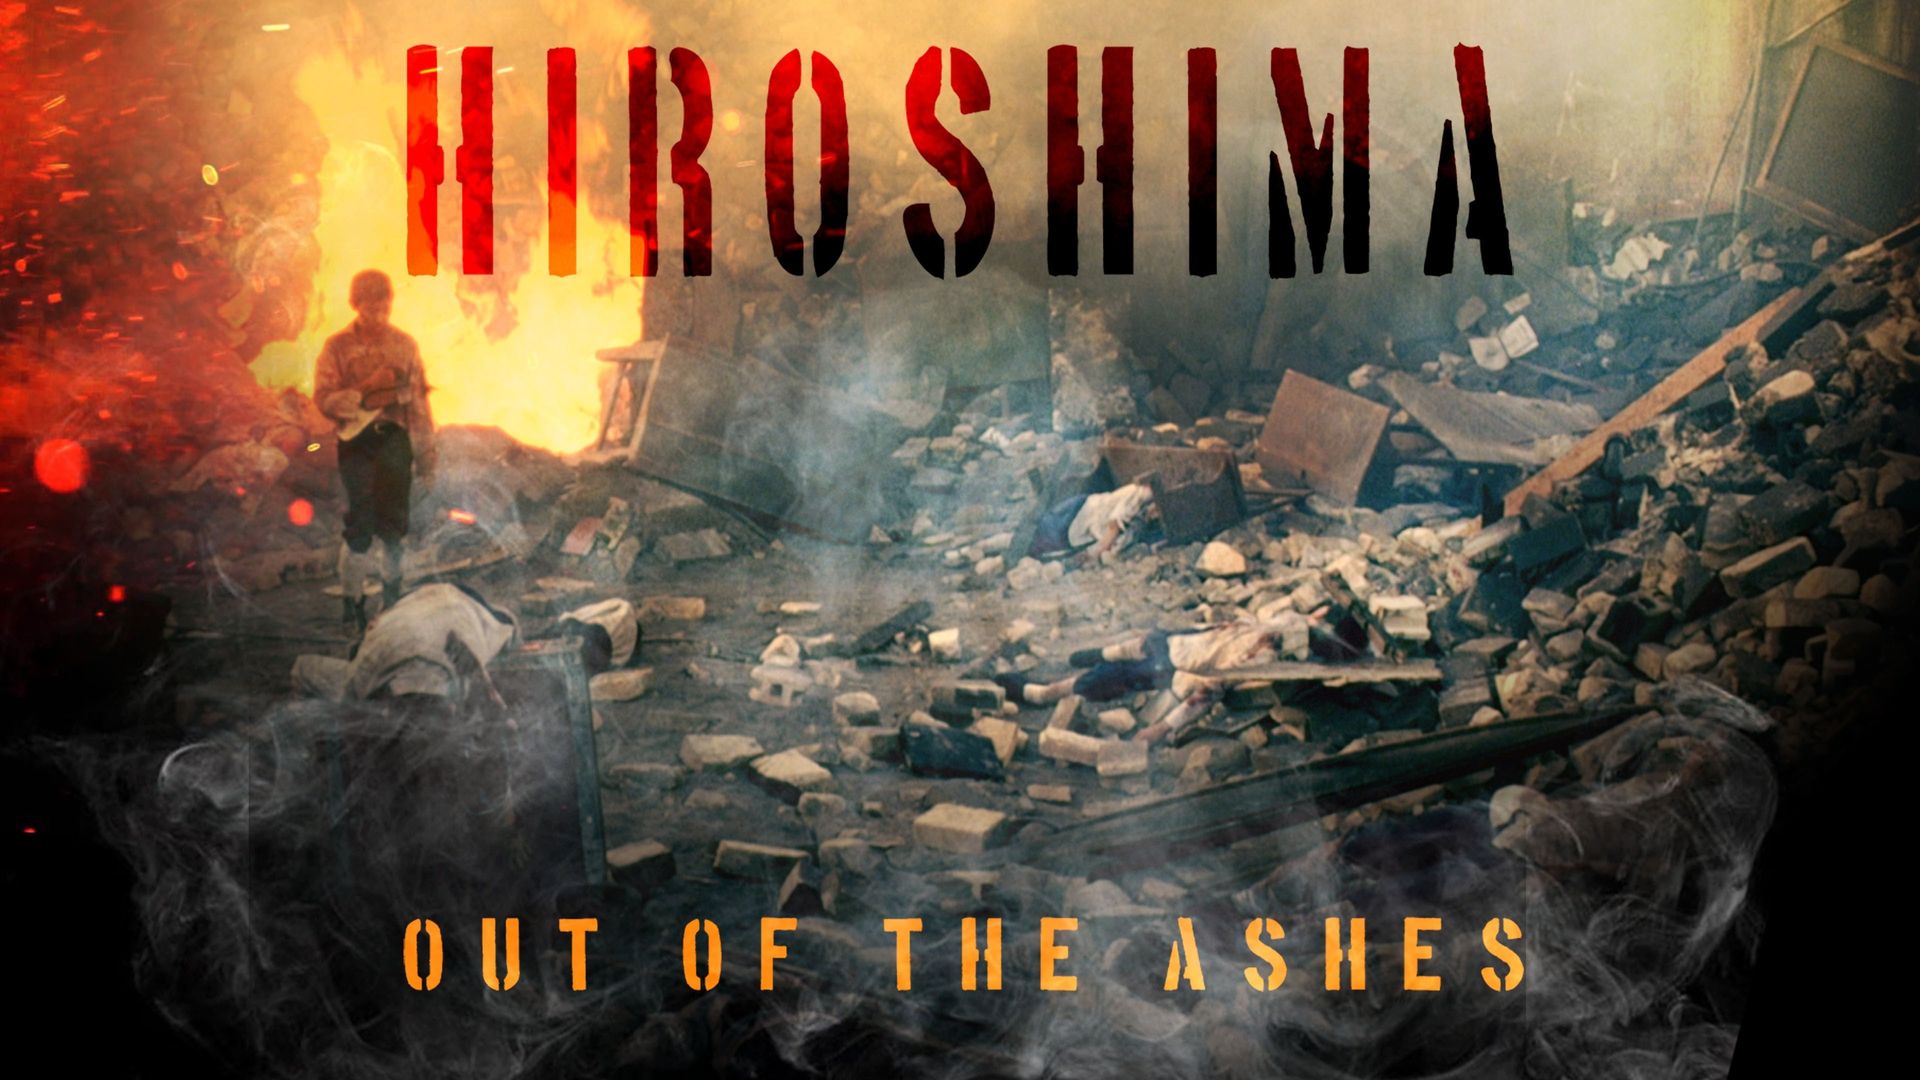 Hiroshima: Out of the Ashes Backdrop